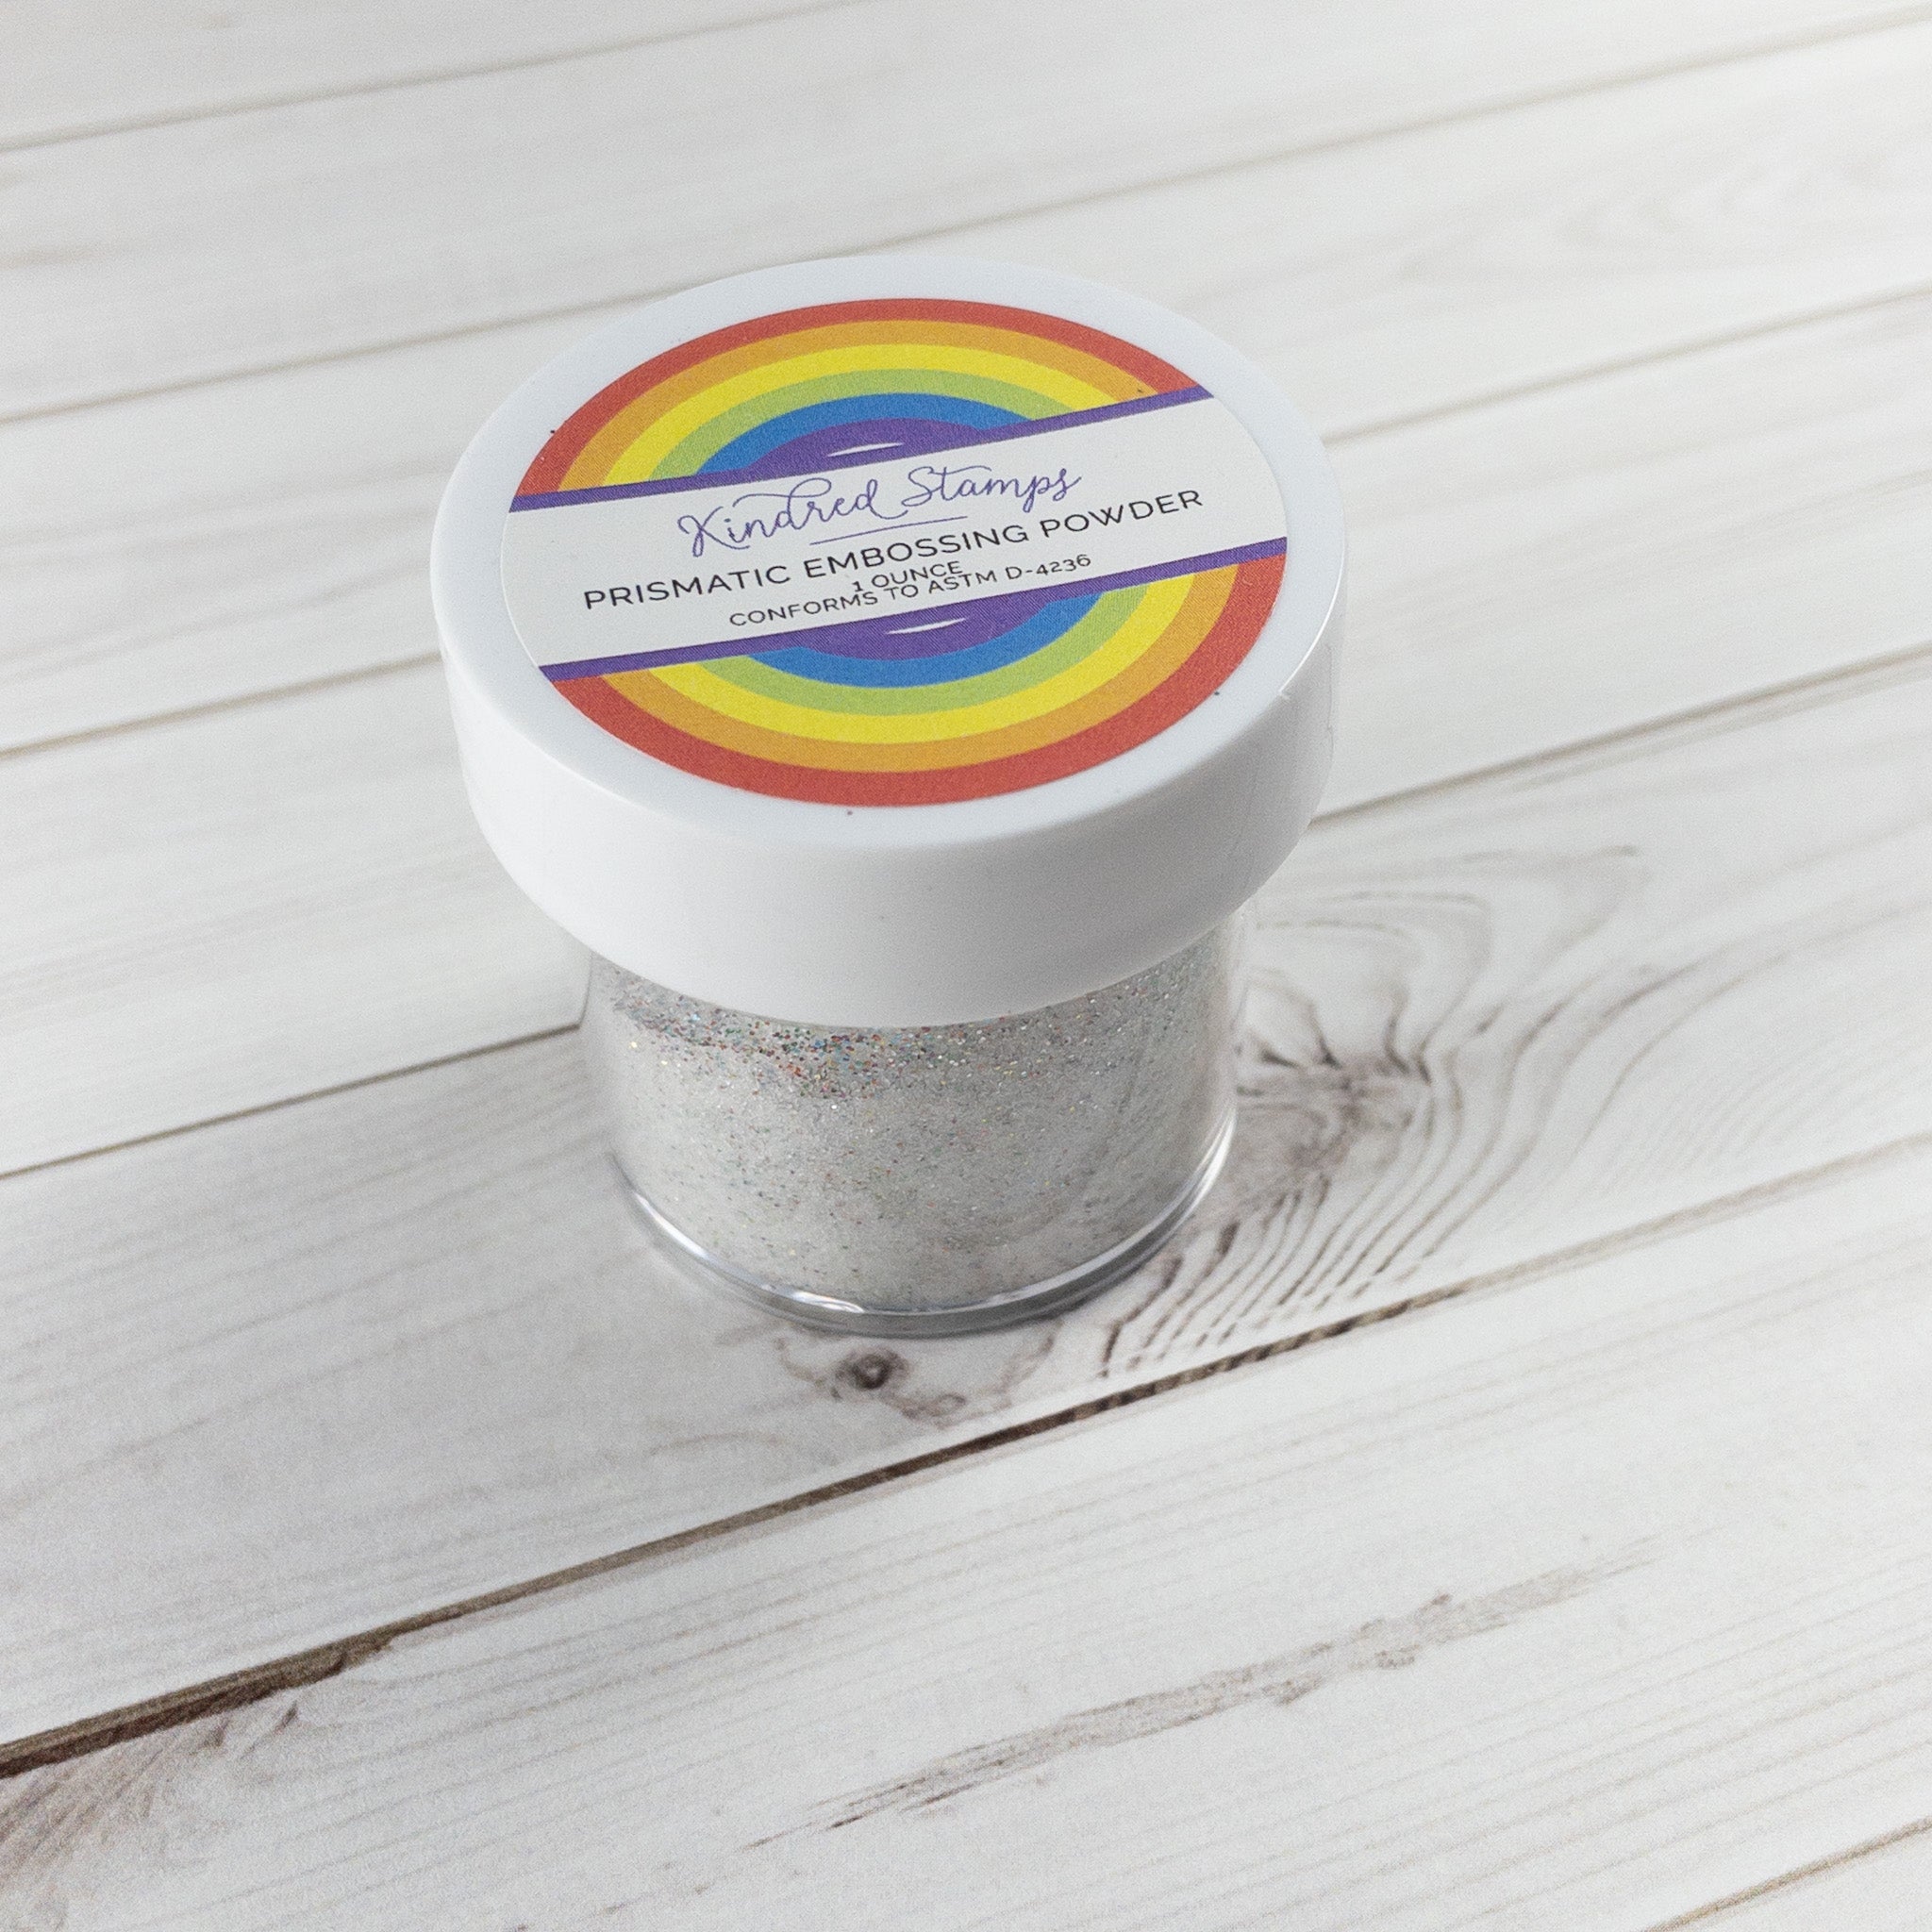 Prismatic Embossing Powder - Kindred Stamps